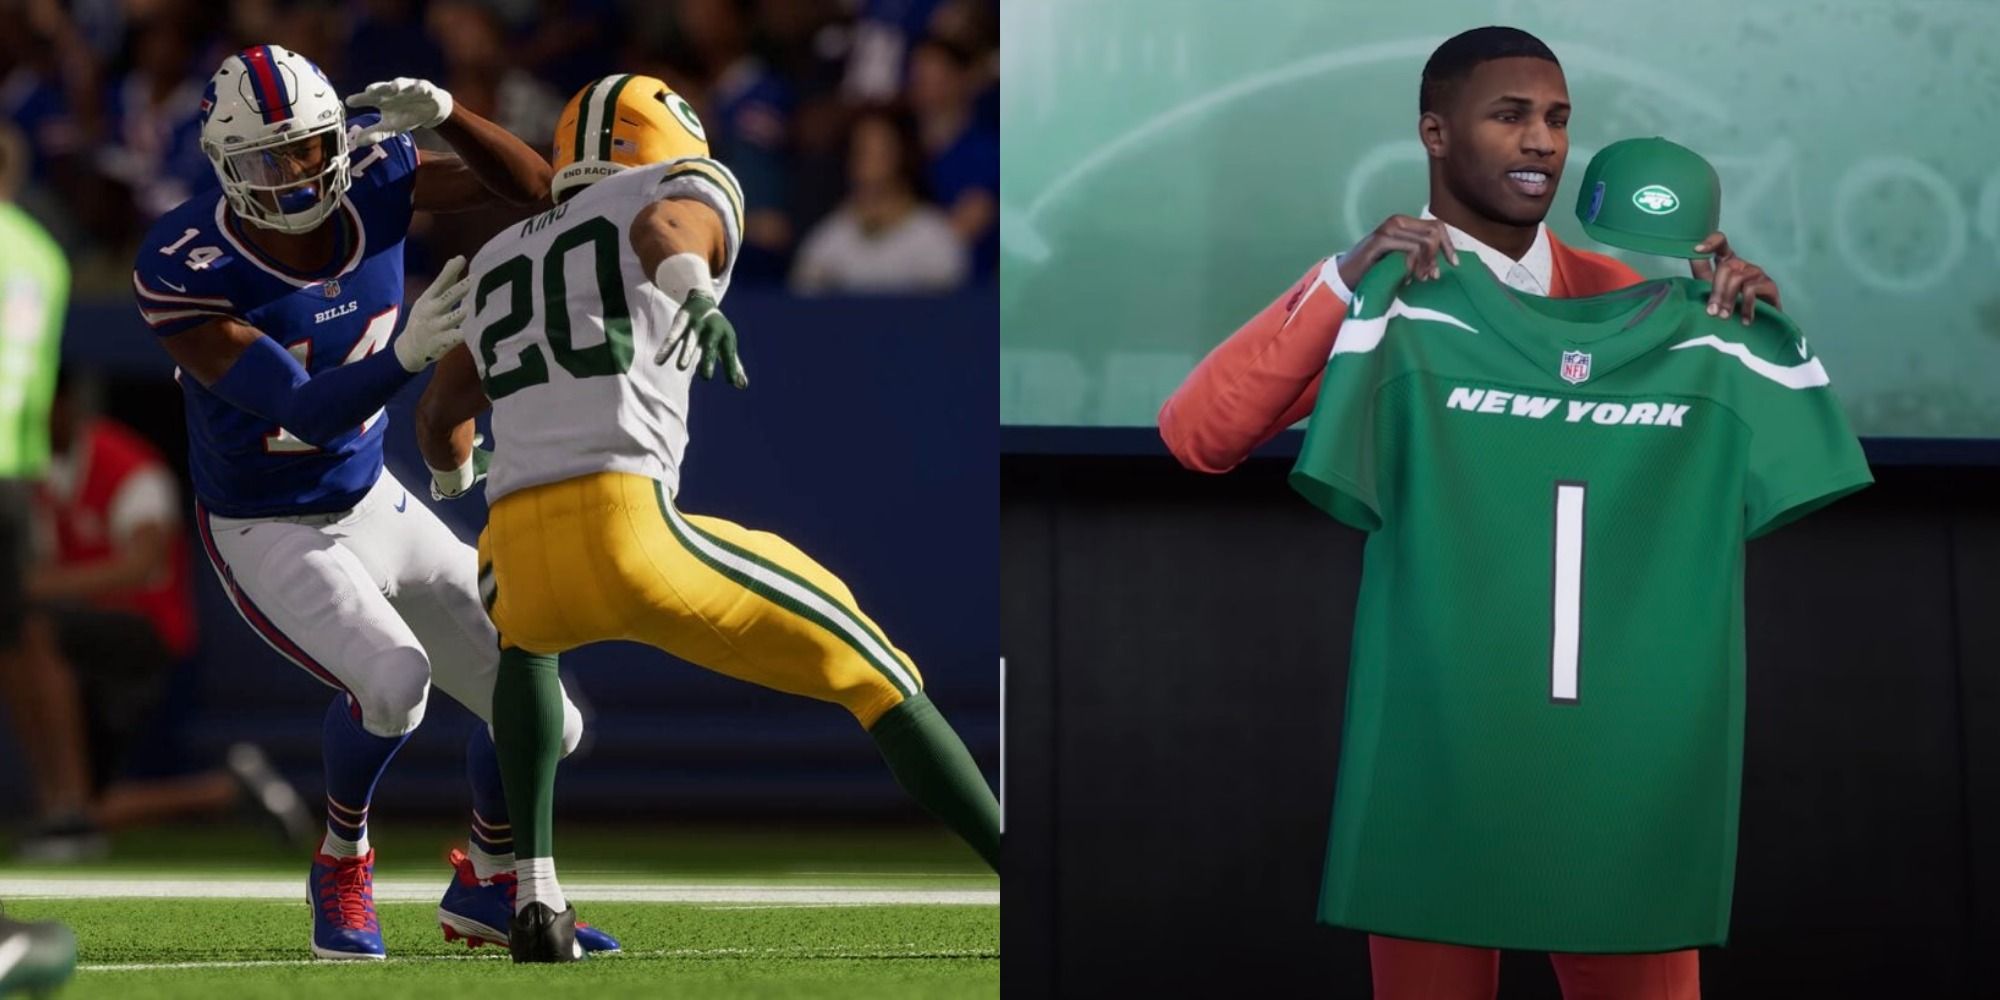 Split image of gameplay in Madden and a player showing off his new jersey